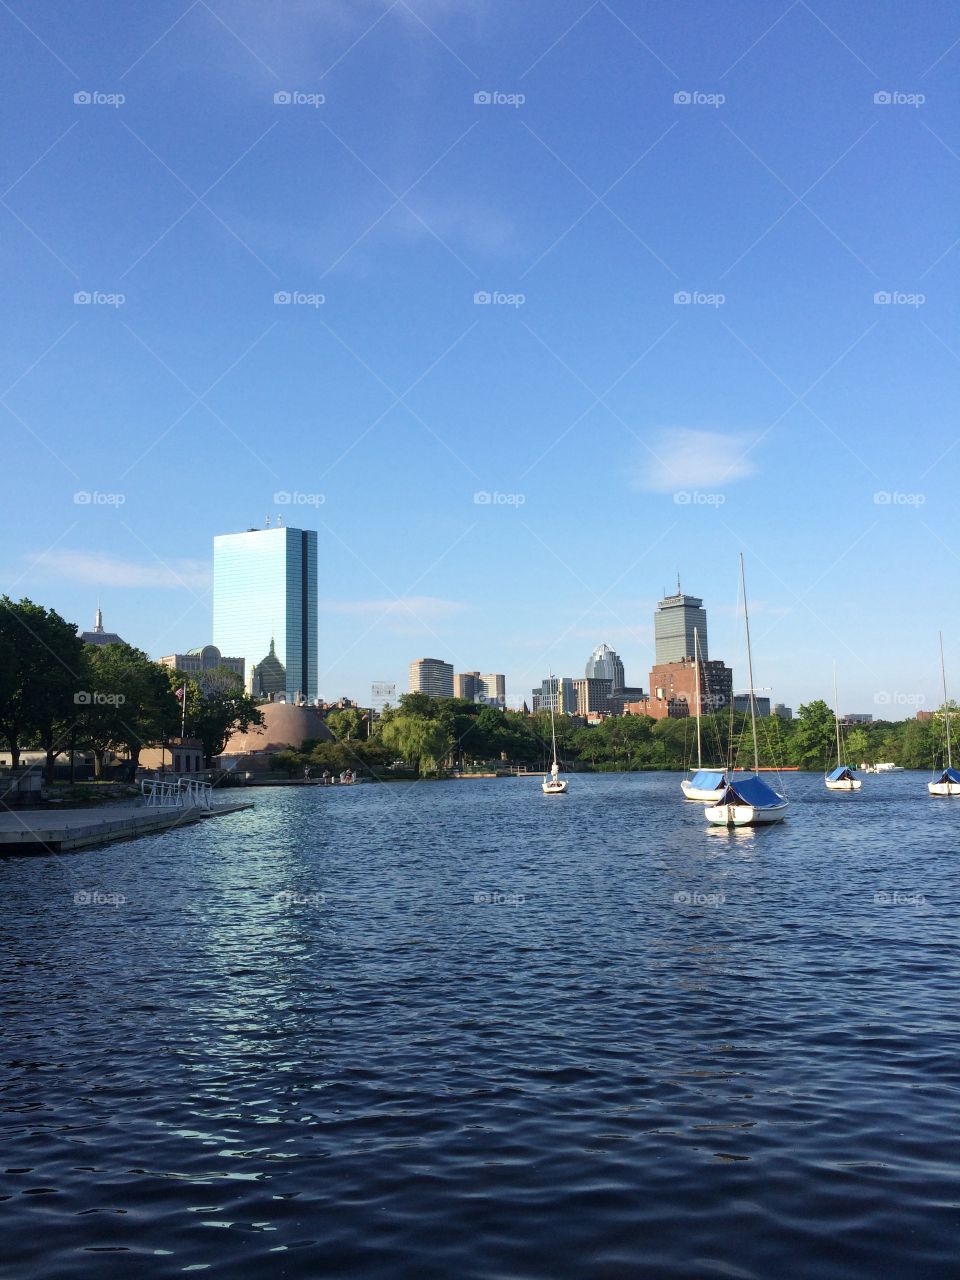 A morning on the Charles River